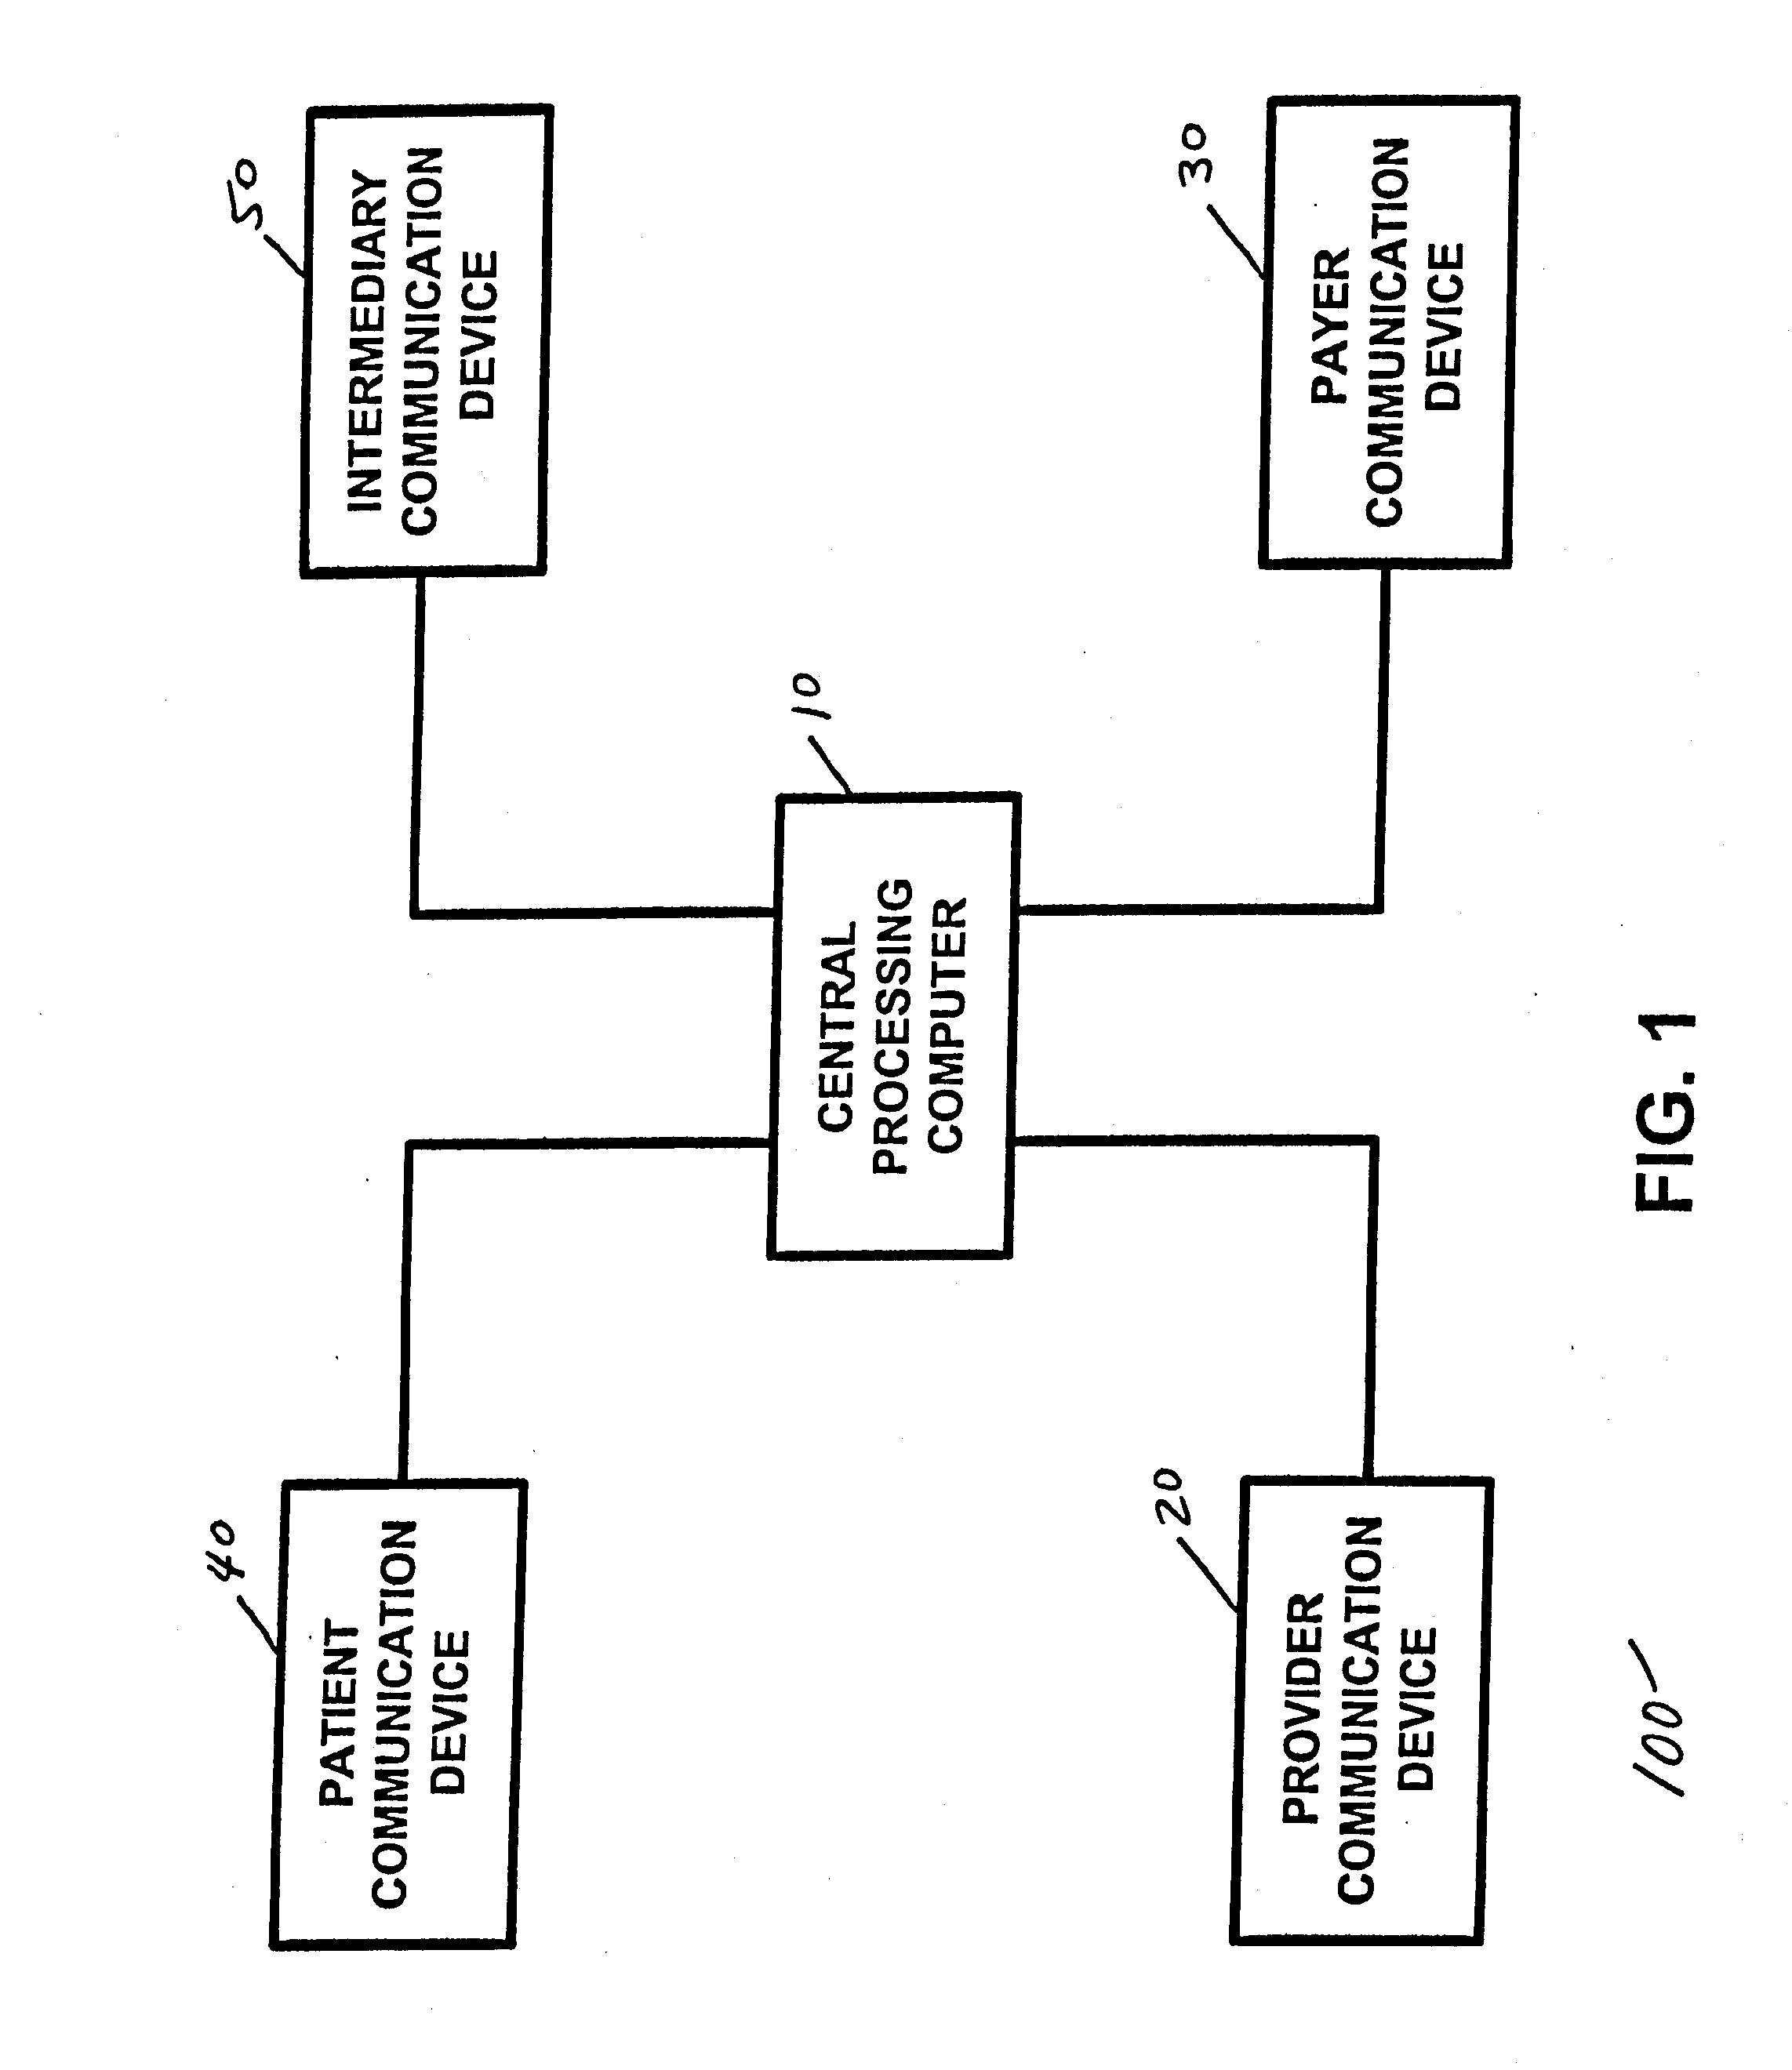 Apparatus and Method for Processing and/or Providing Healthcare Information and/or Healthcare-Related Information